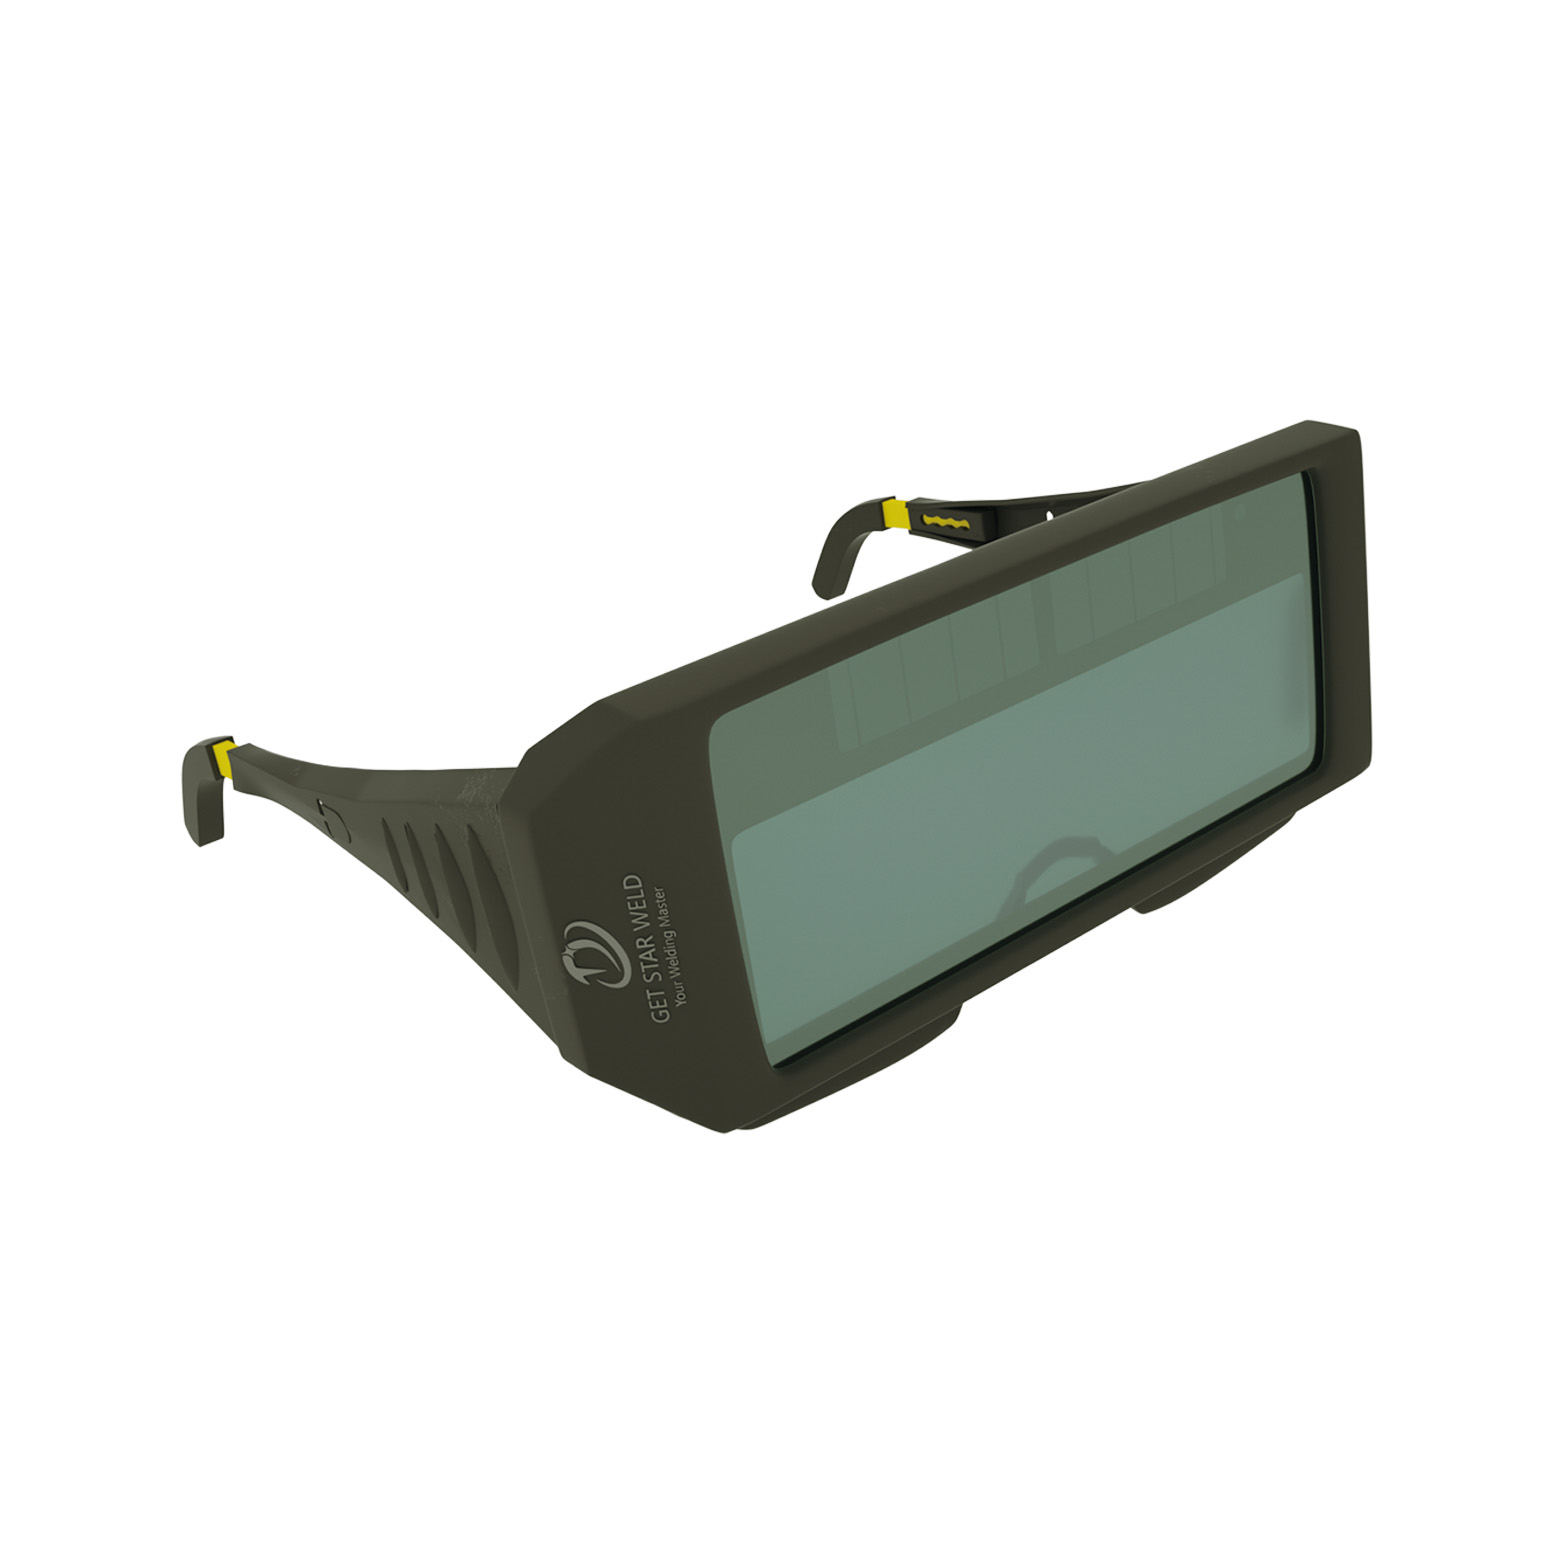 Welding Safety Glasses